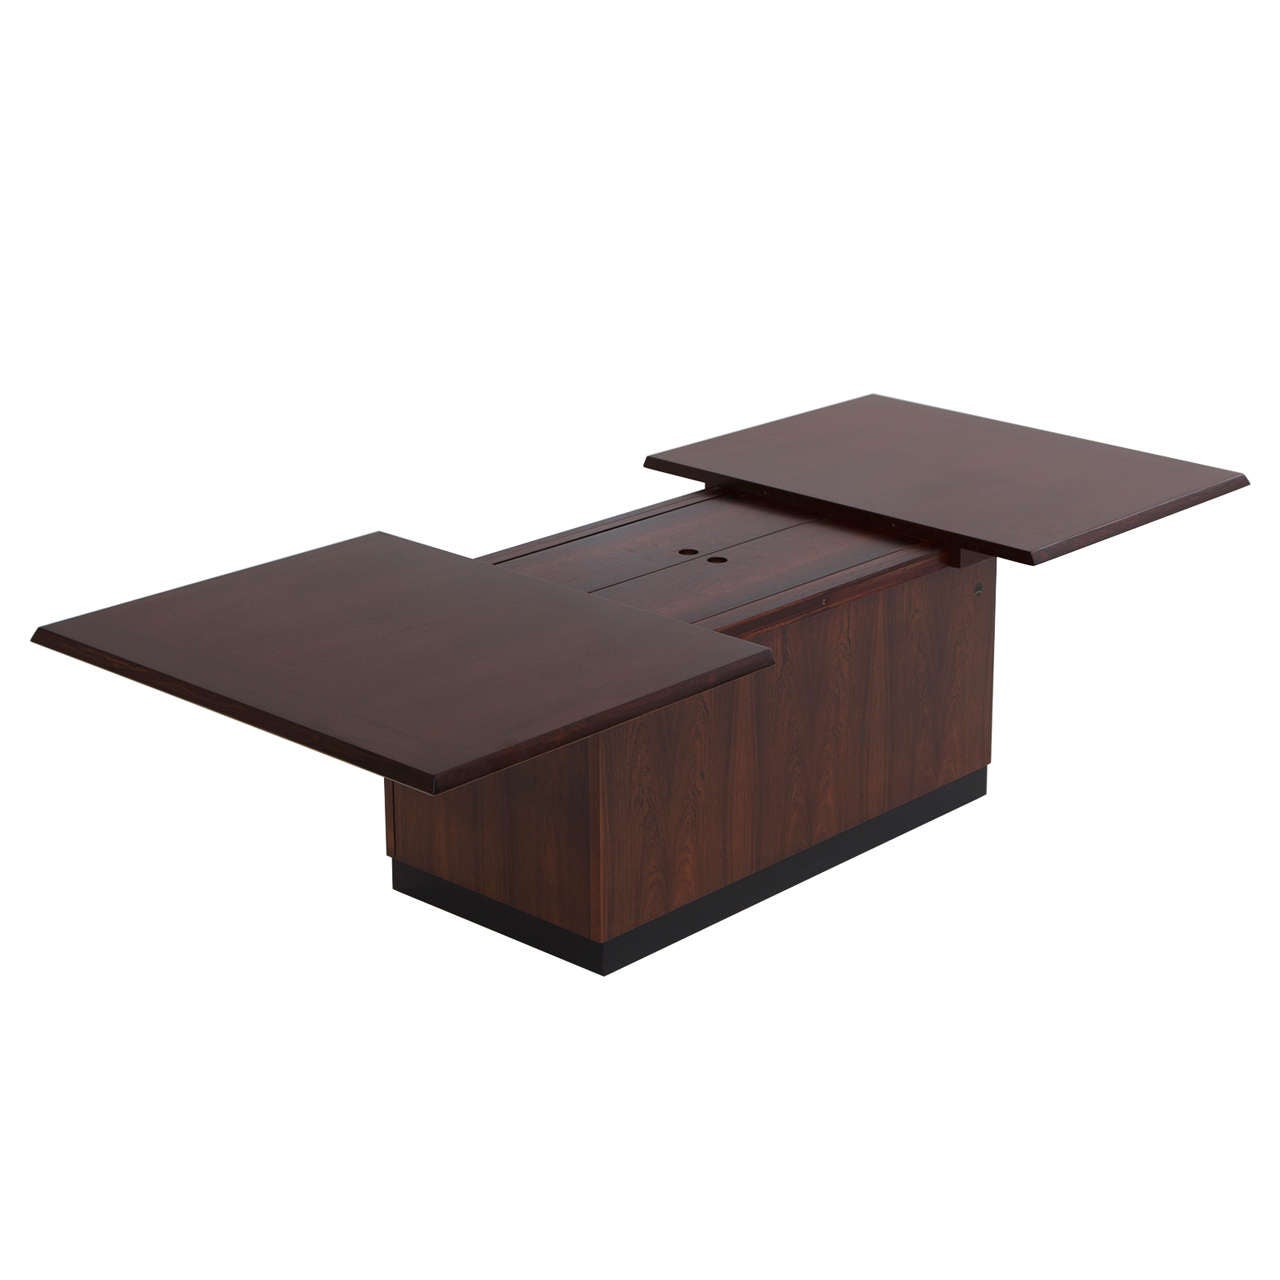 Luxury Danish Rosewood Coffee Table with Dry Bar